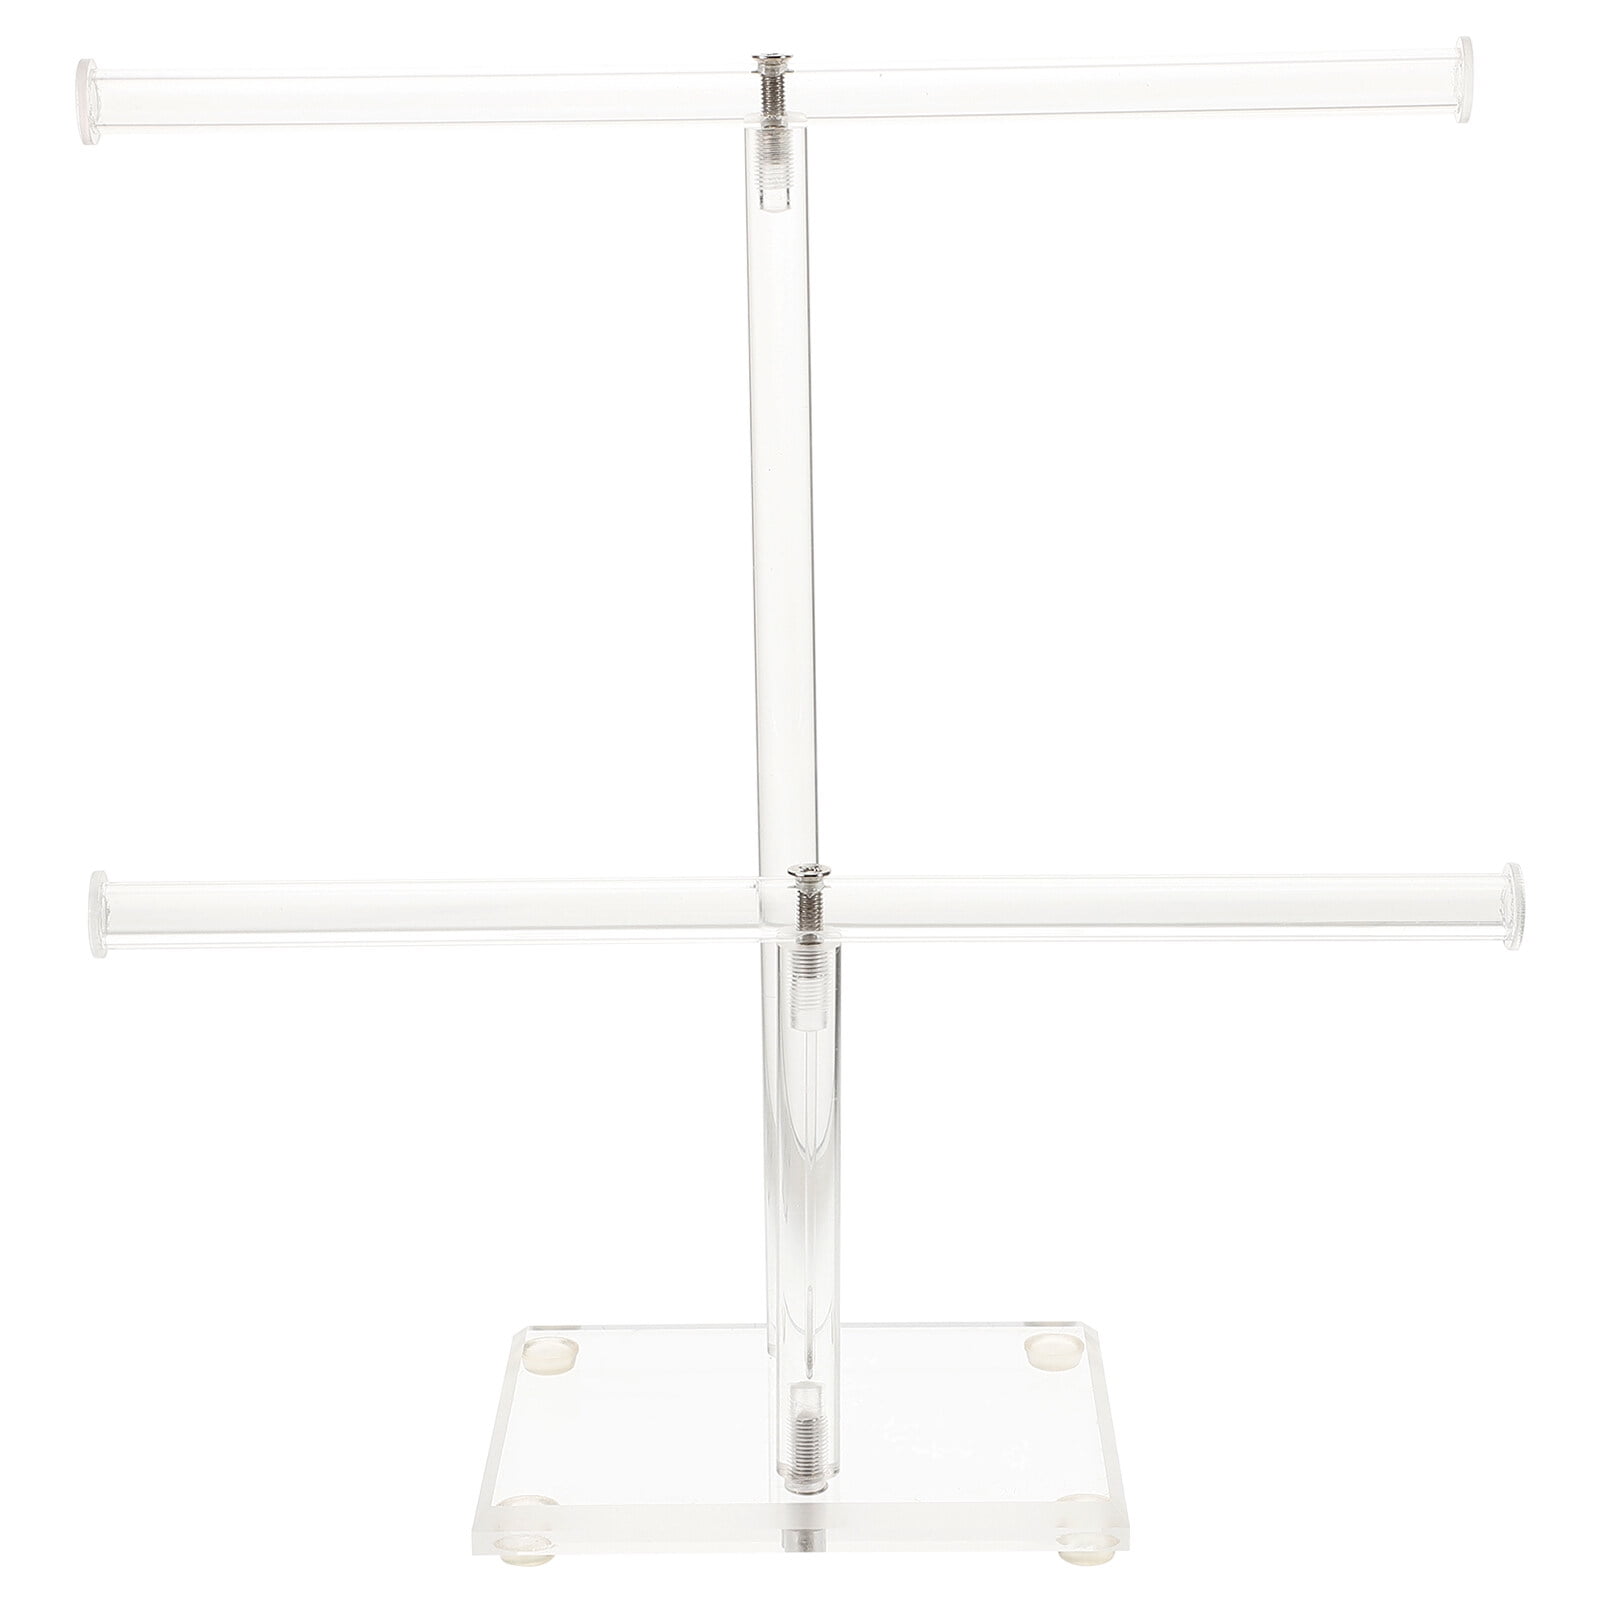 Ikee Design® Acrylic 3-Tiered T-bar Jewelry Display Stand